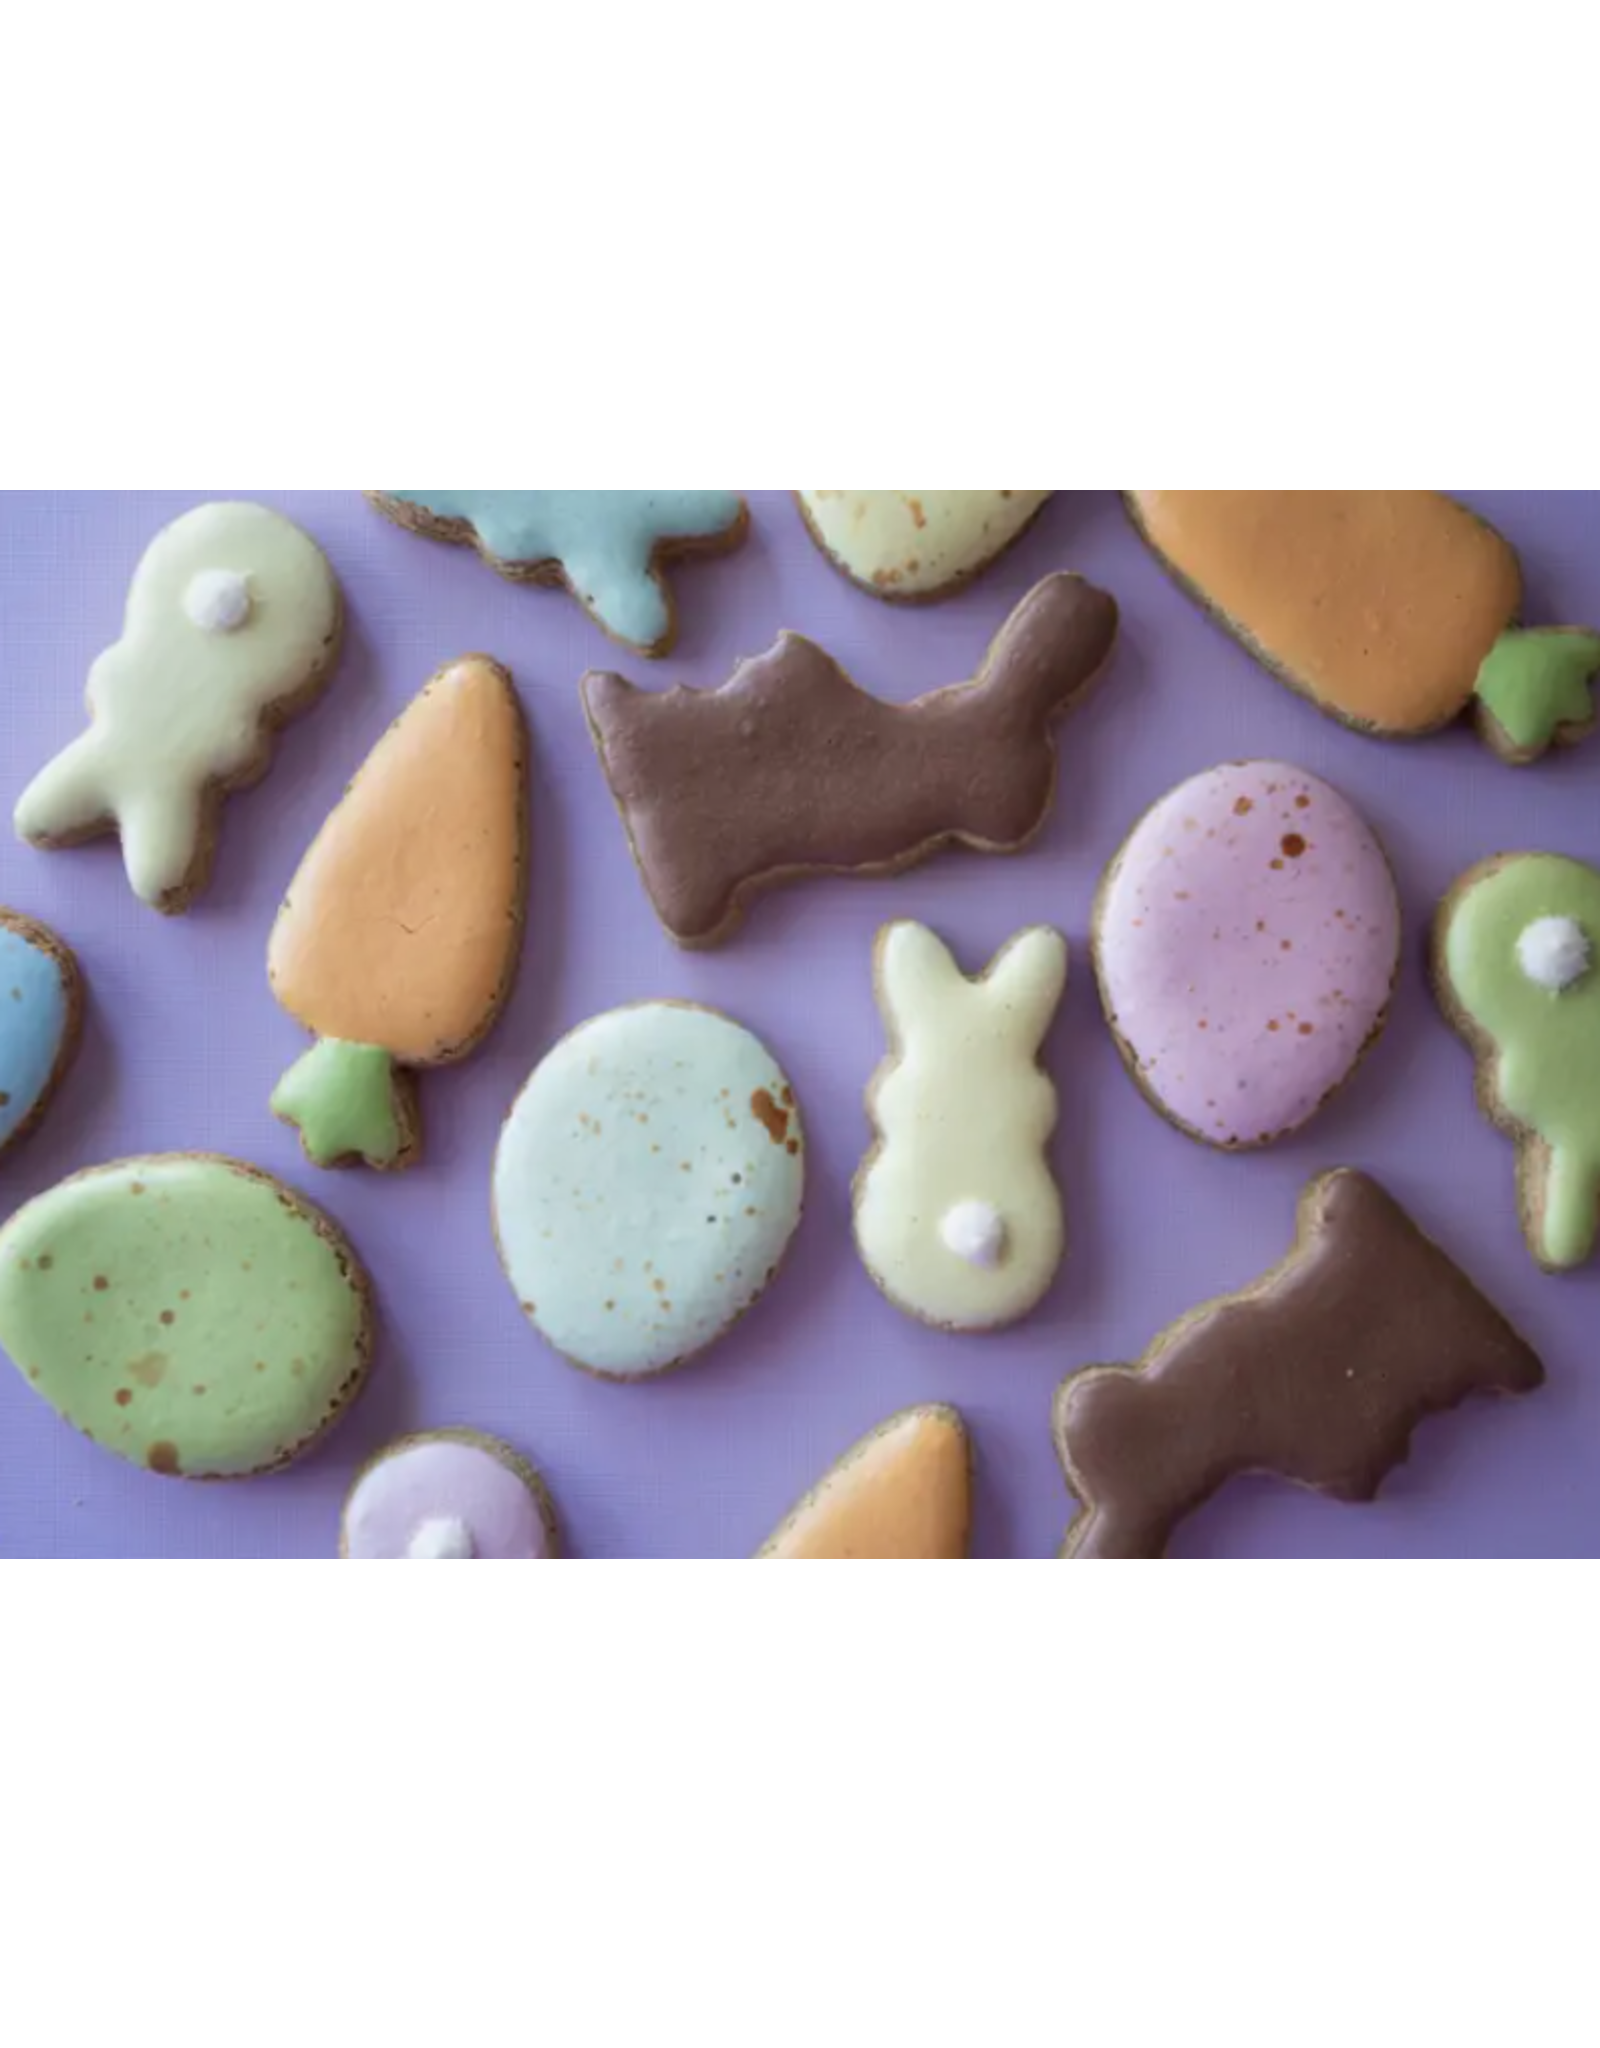 Clover Dog Co Hoppy Easter Biscuit Mix - Dog Treats